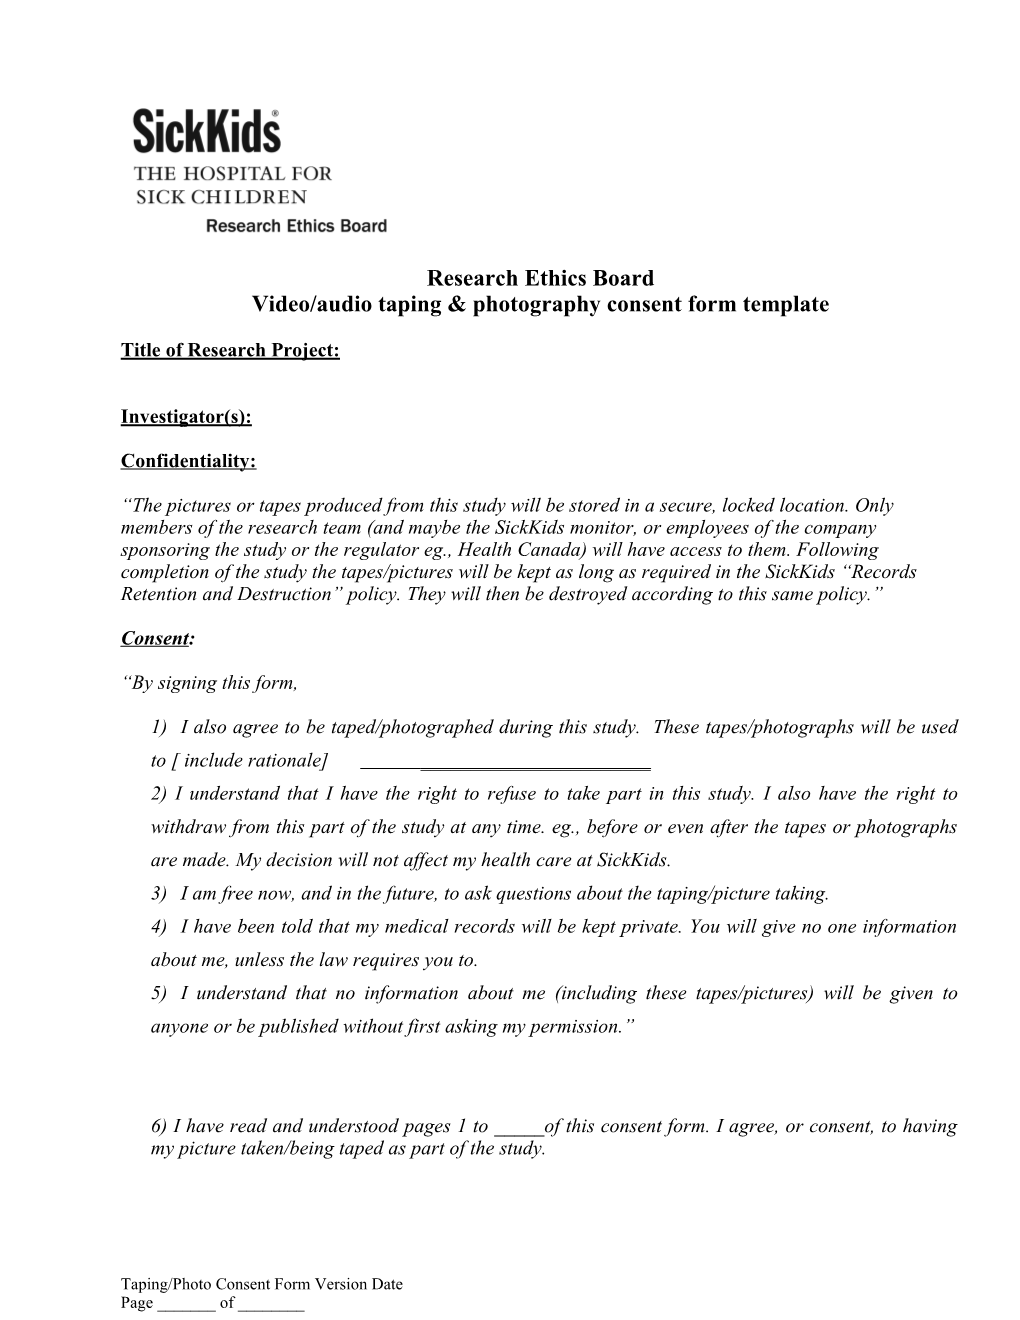 Template for Videos, Photographs and Sound Recordings Consent Forms (July 2005)